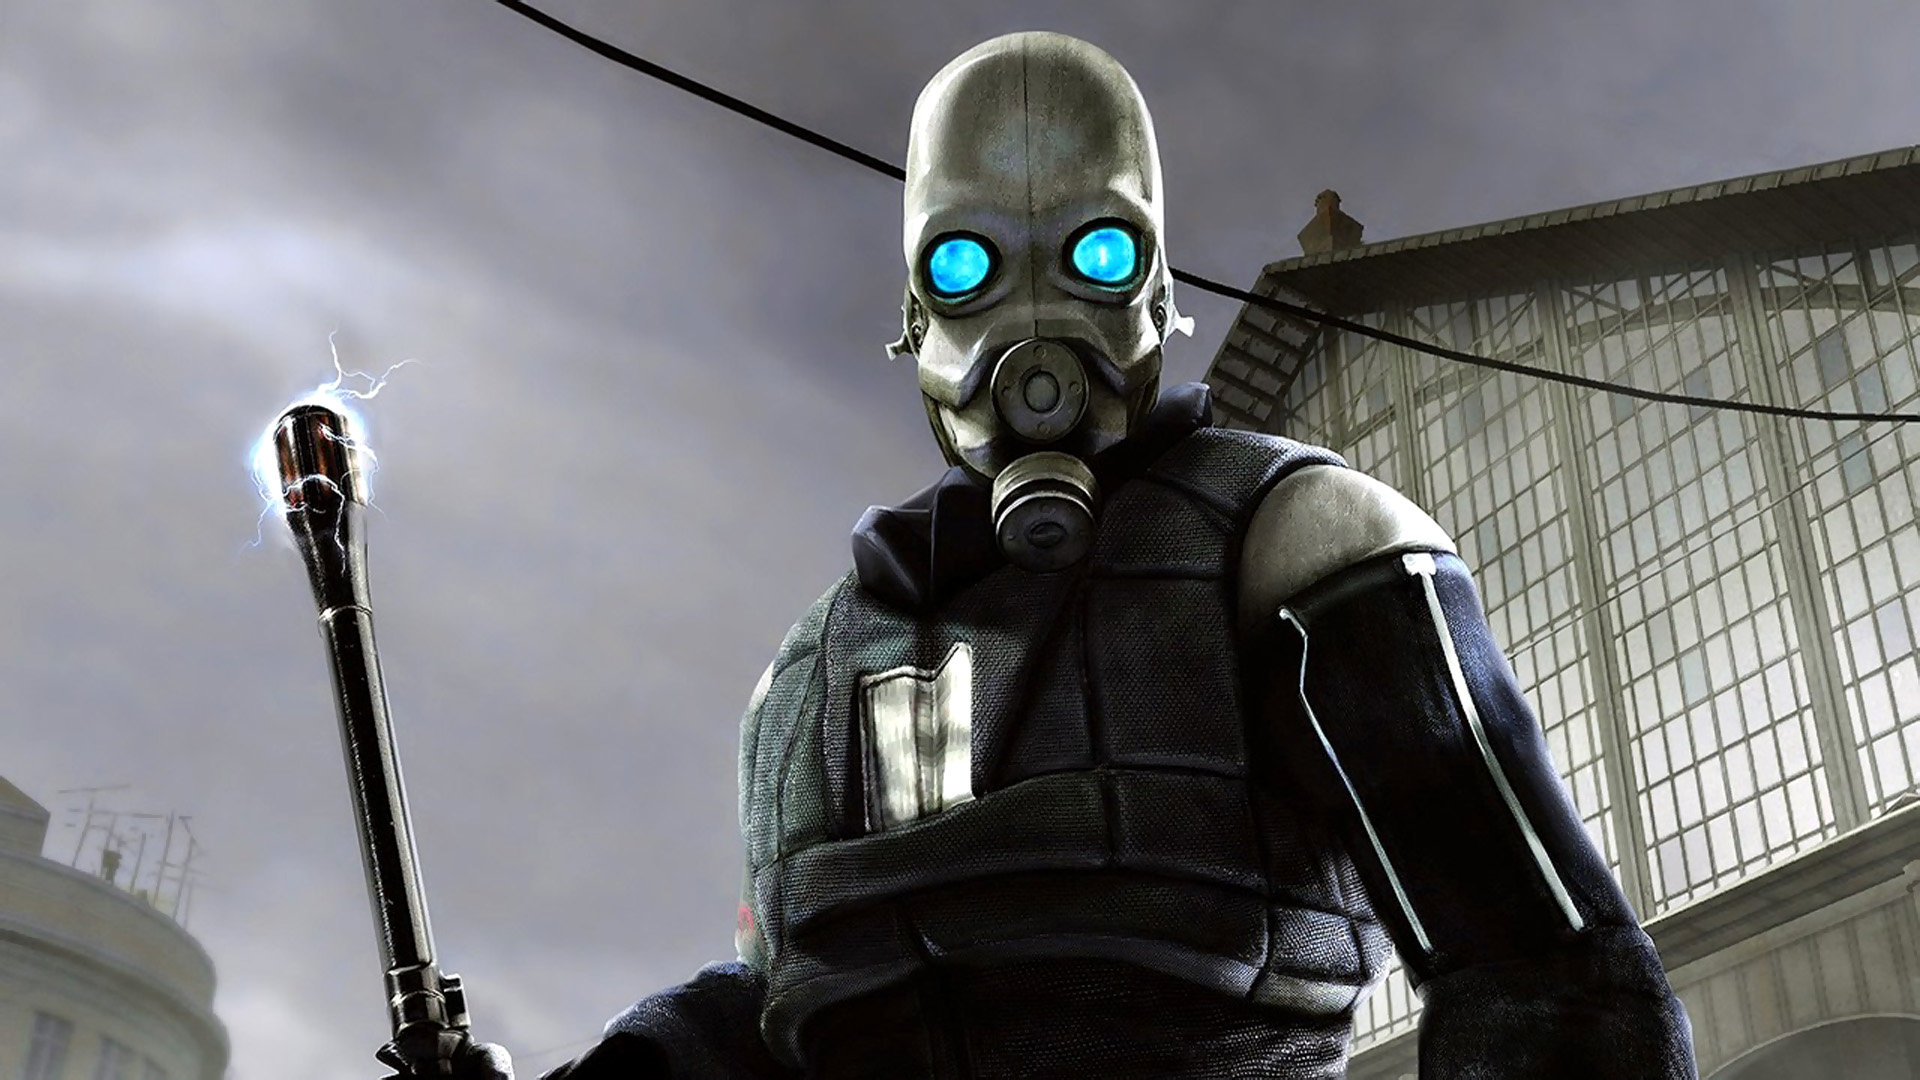 A New SteamDB Listing For Half-Life 2: Remastered Collection Has Surfaced  Very Recently